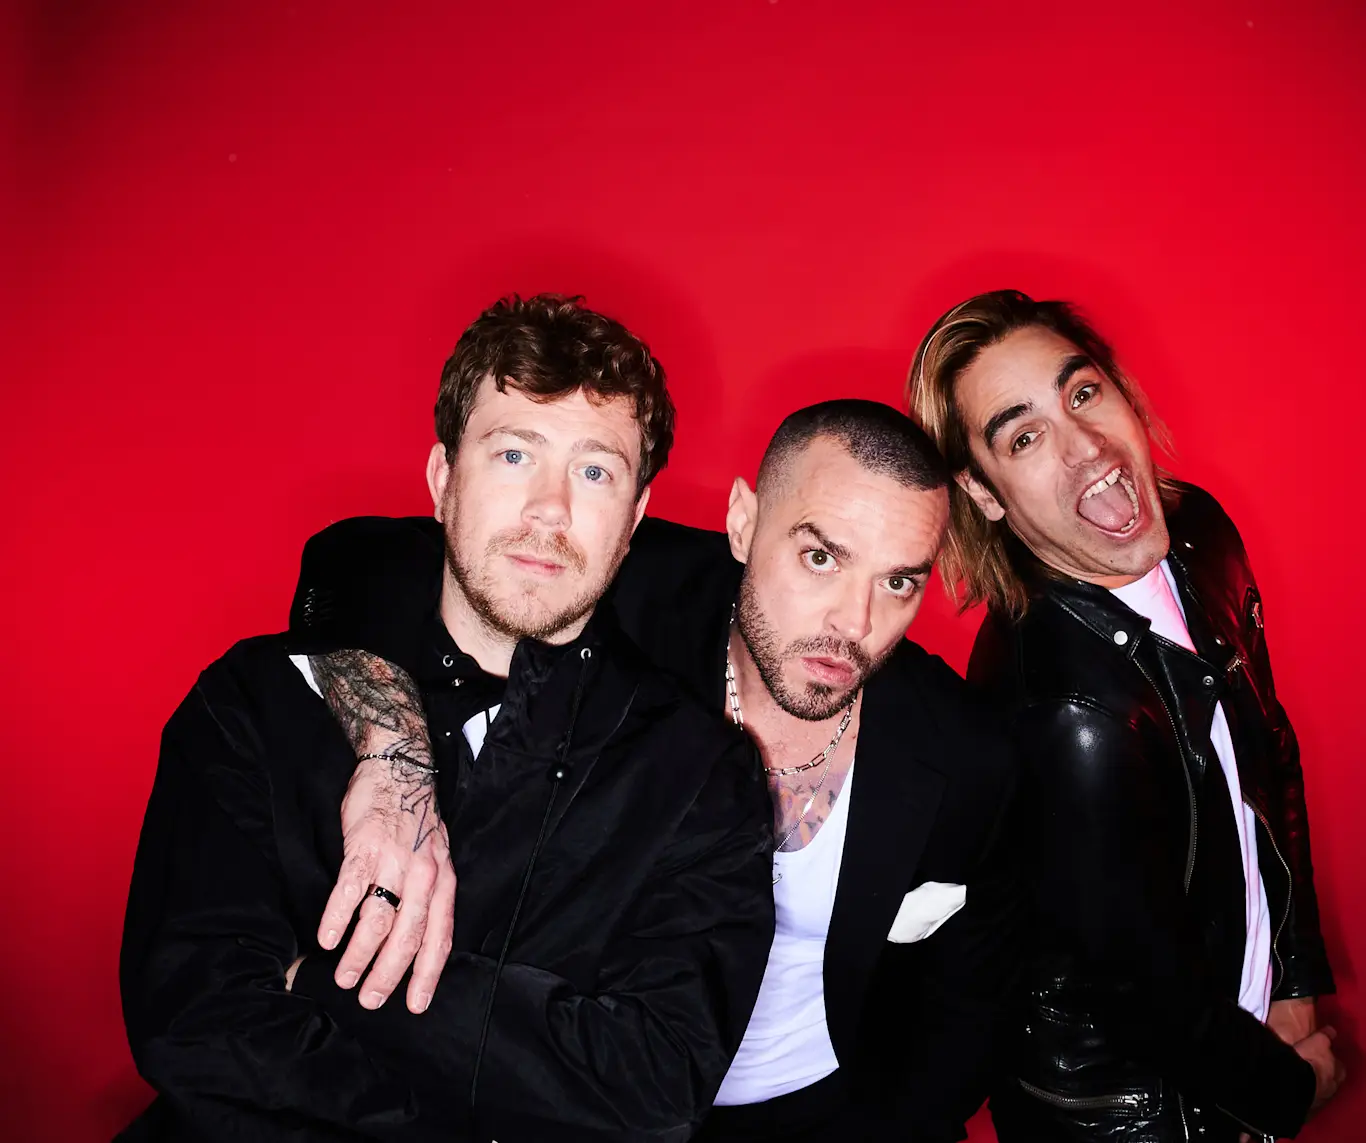 BUSTED announce shows for 3Arena, Dublin and SSE Arena, Belfast as part of 20th anniversary greatest hits arena tour